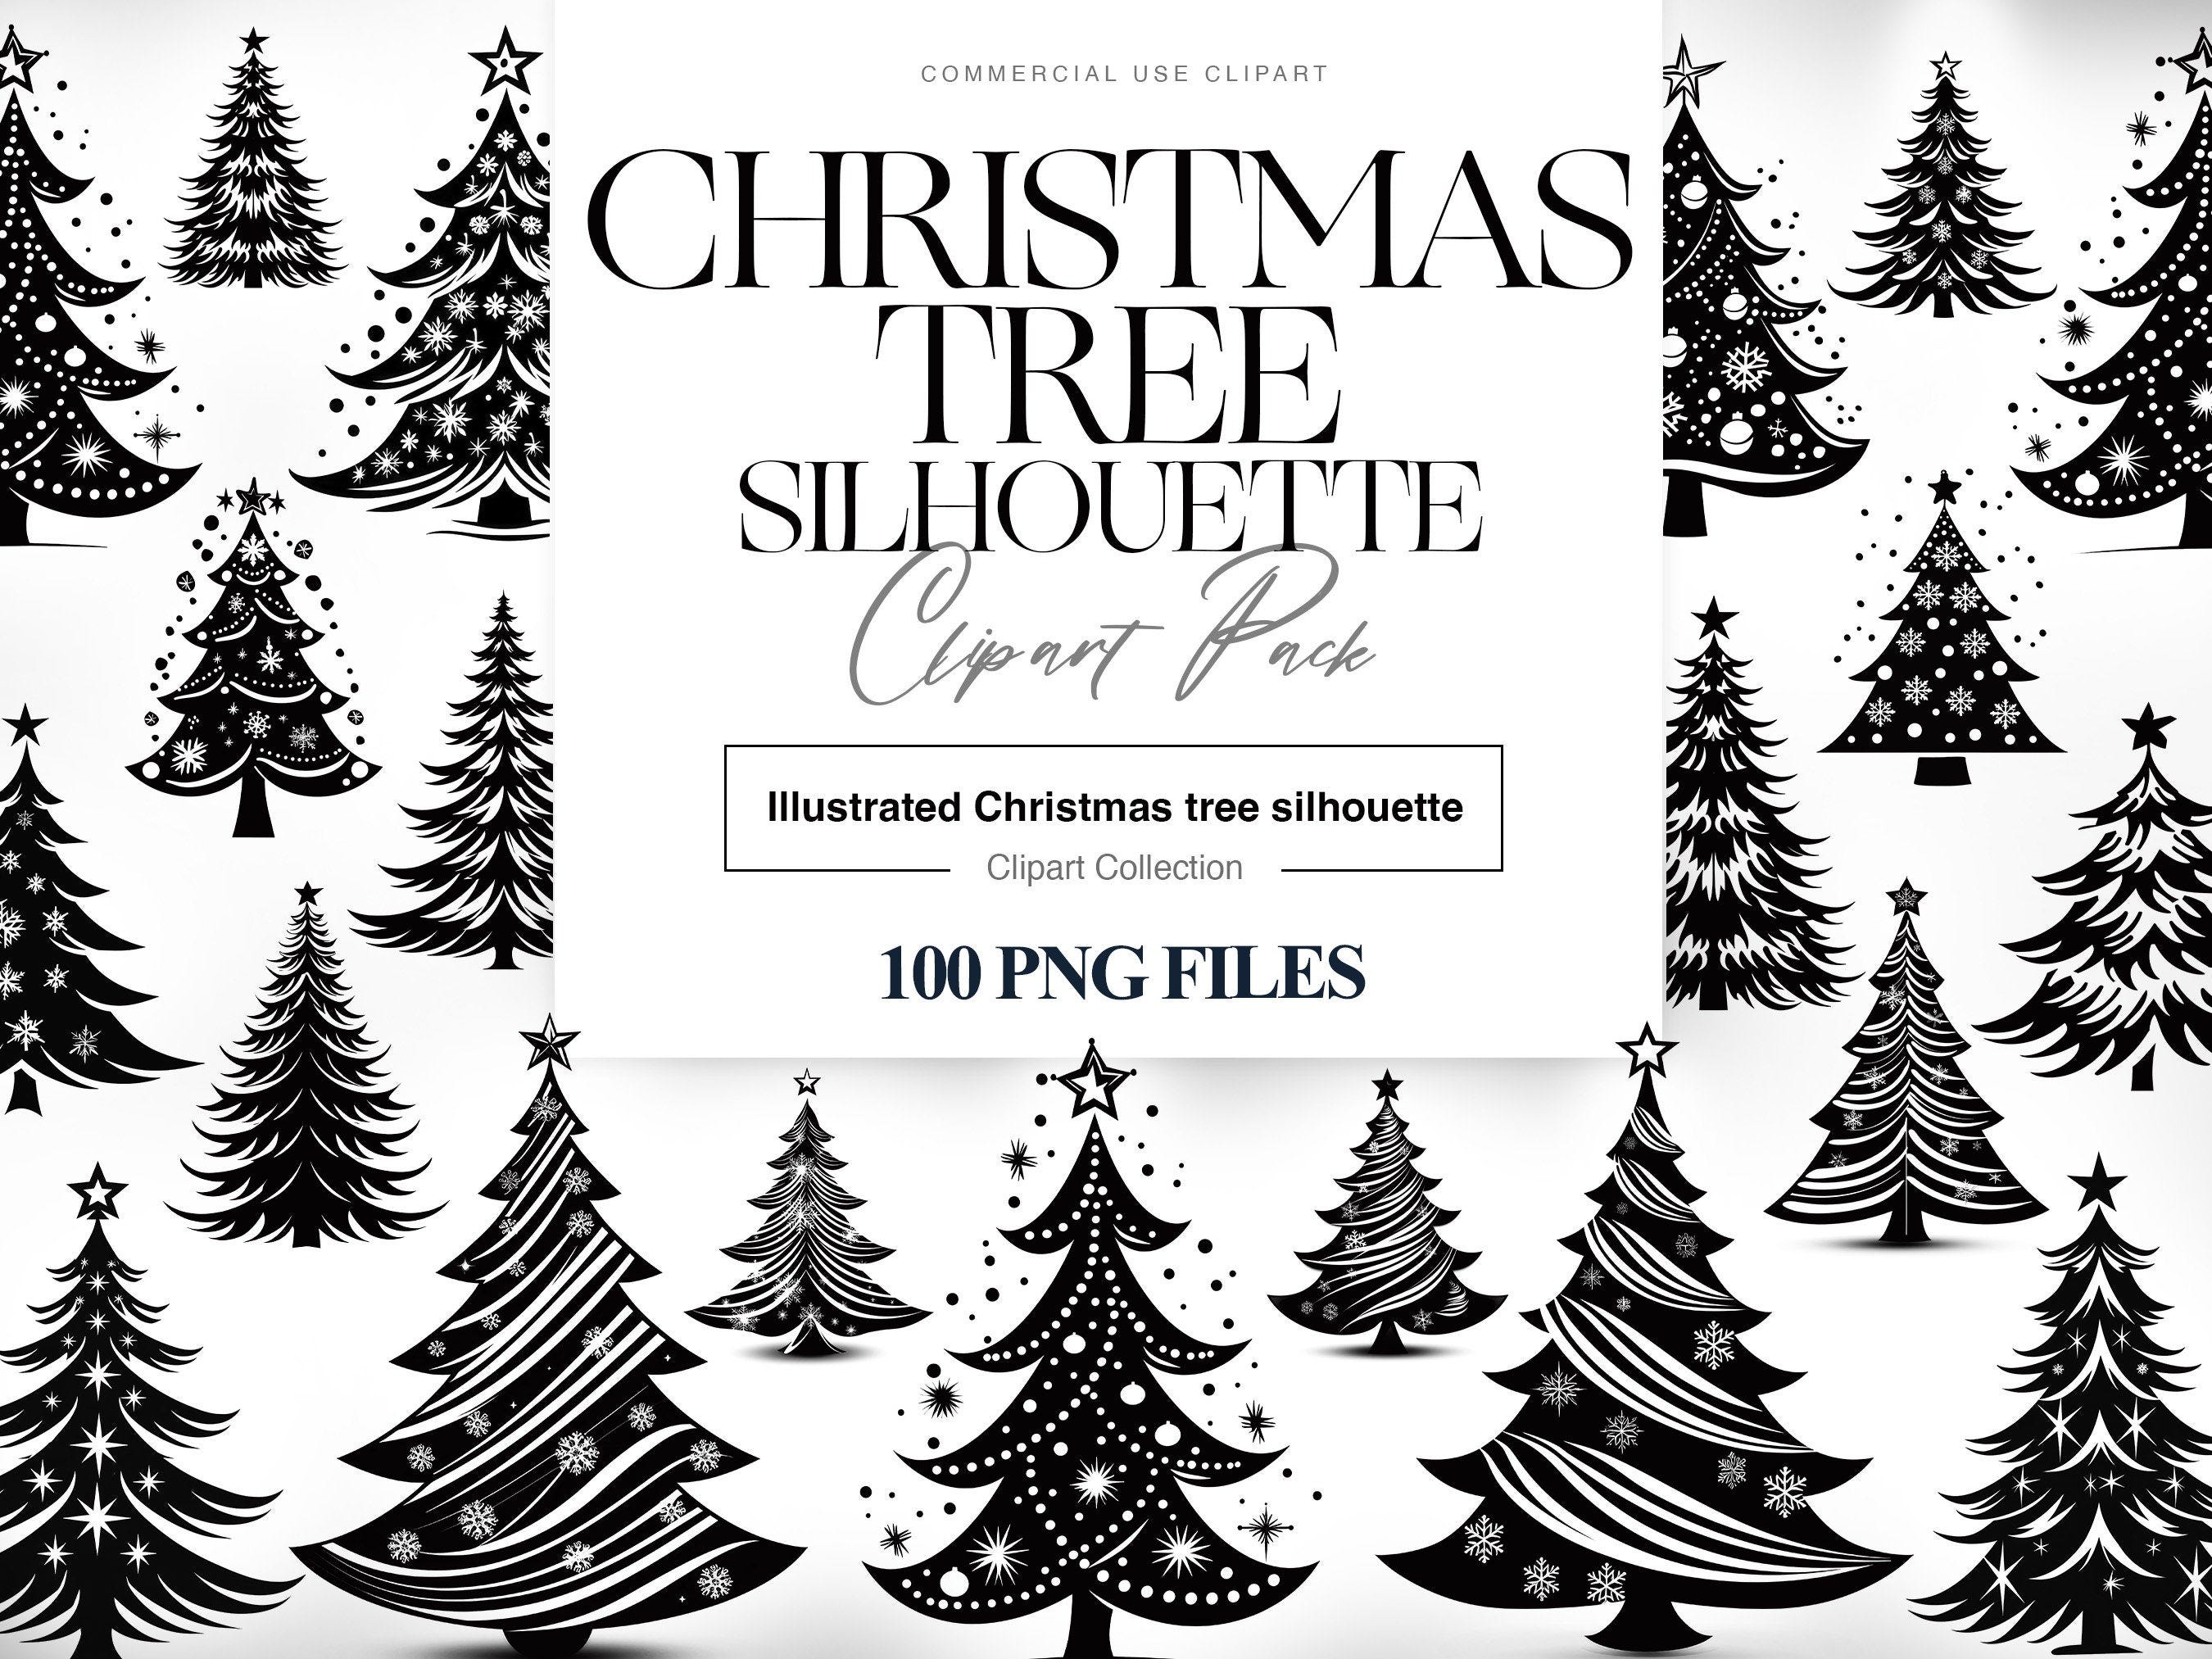 100 Christmas Tree Silhouette Clipart, Holiday, Christmas Ornaments, Pine Tree Silhouette, Christmas Tree PNG